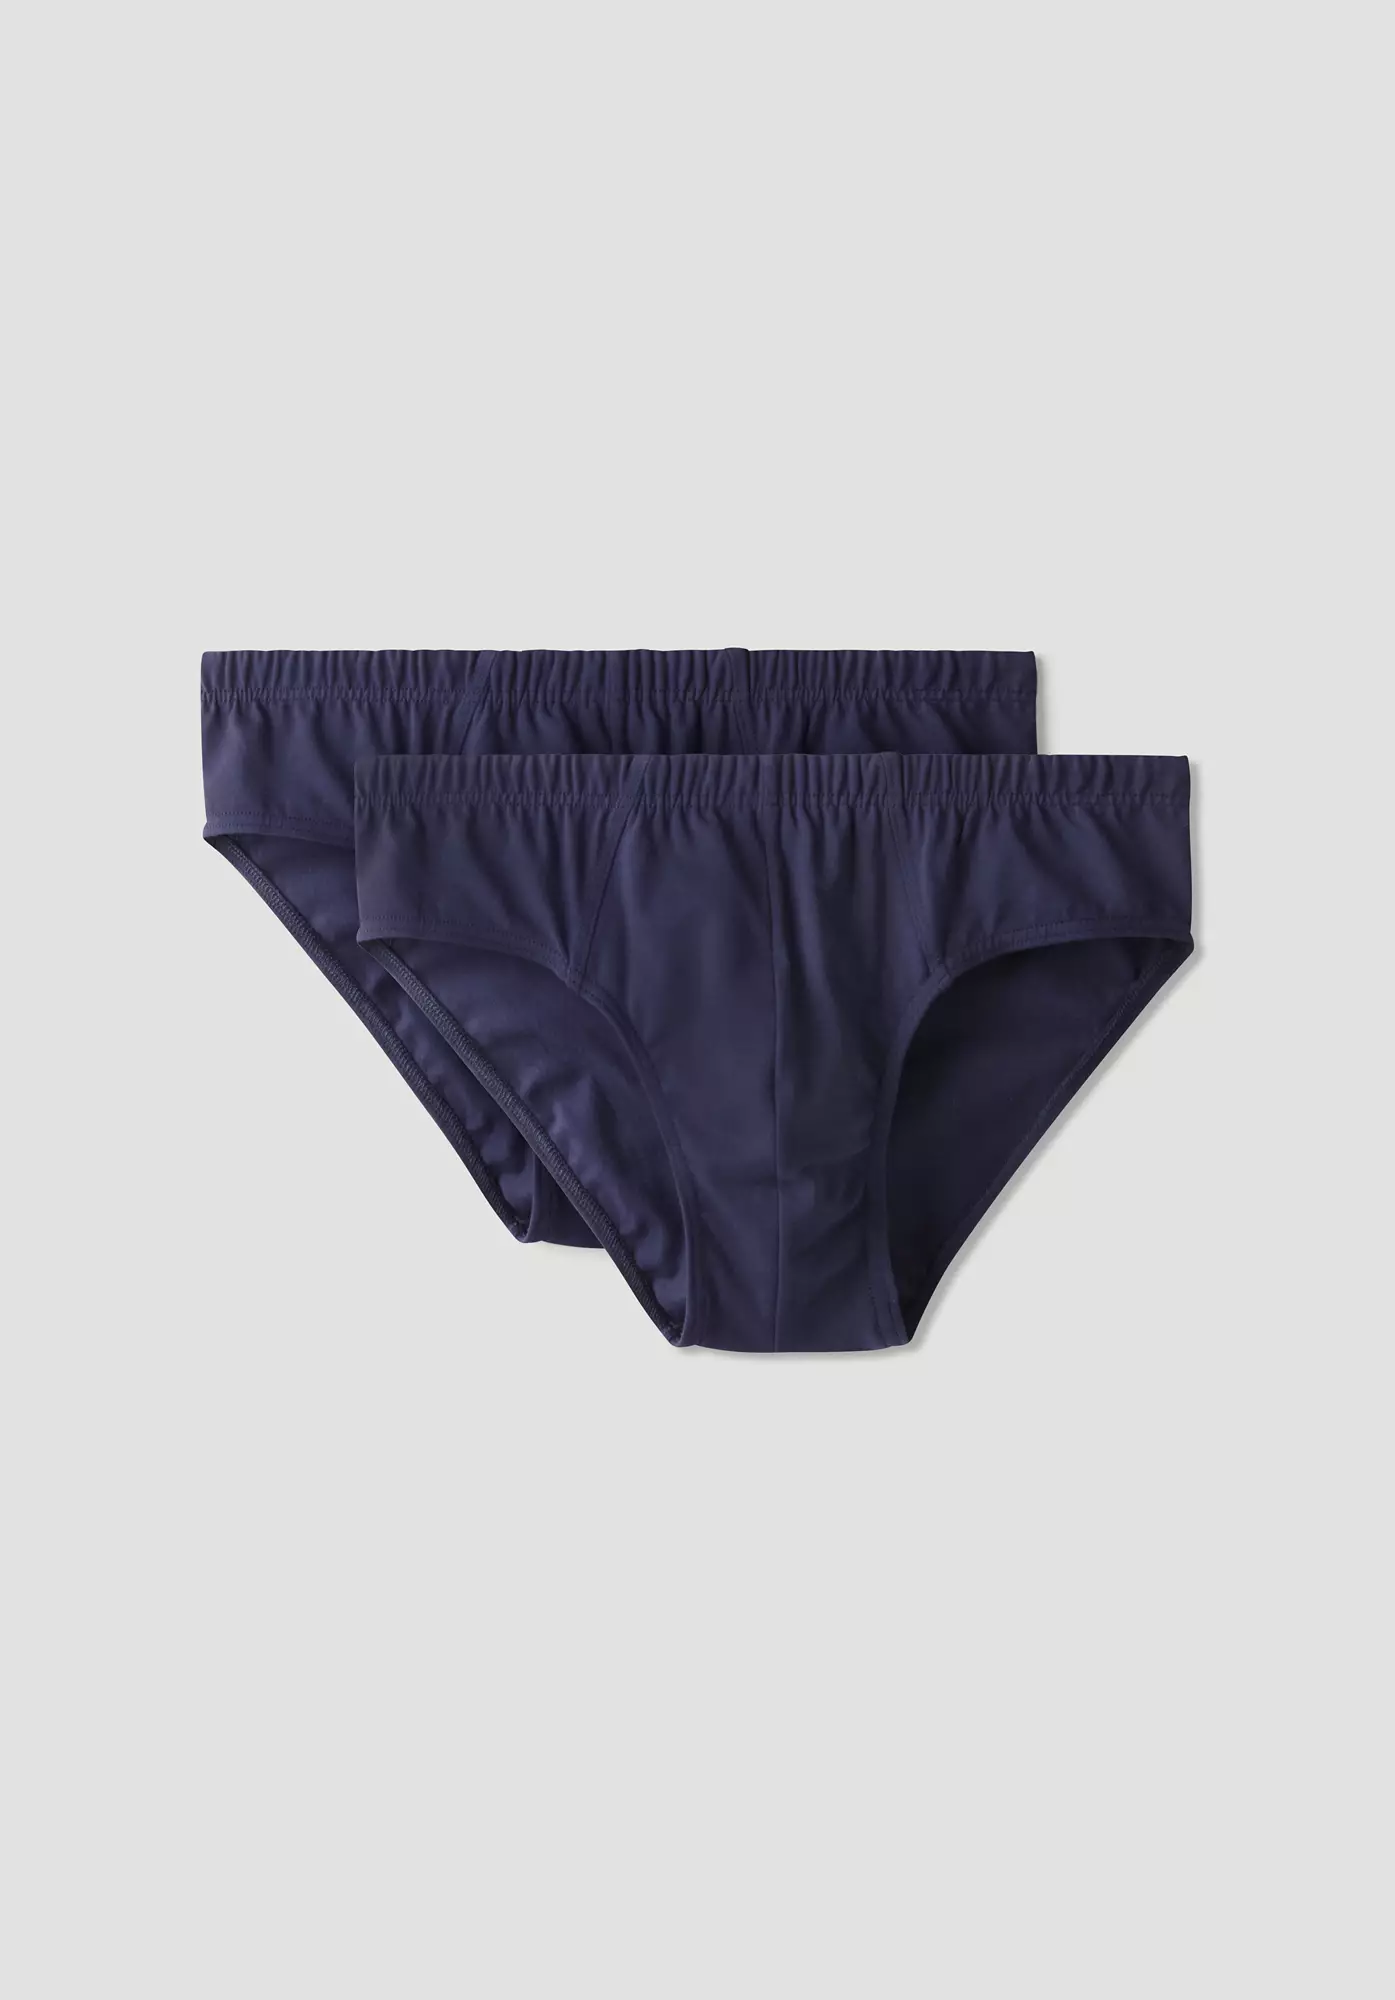 PureLUX briefs in a set of 2 made of organic cotton - 4